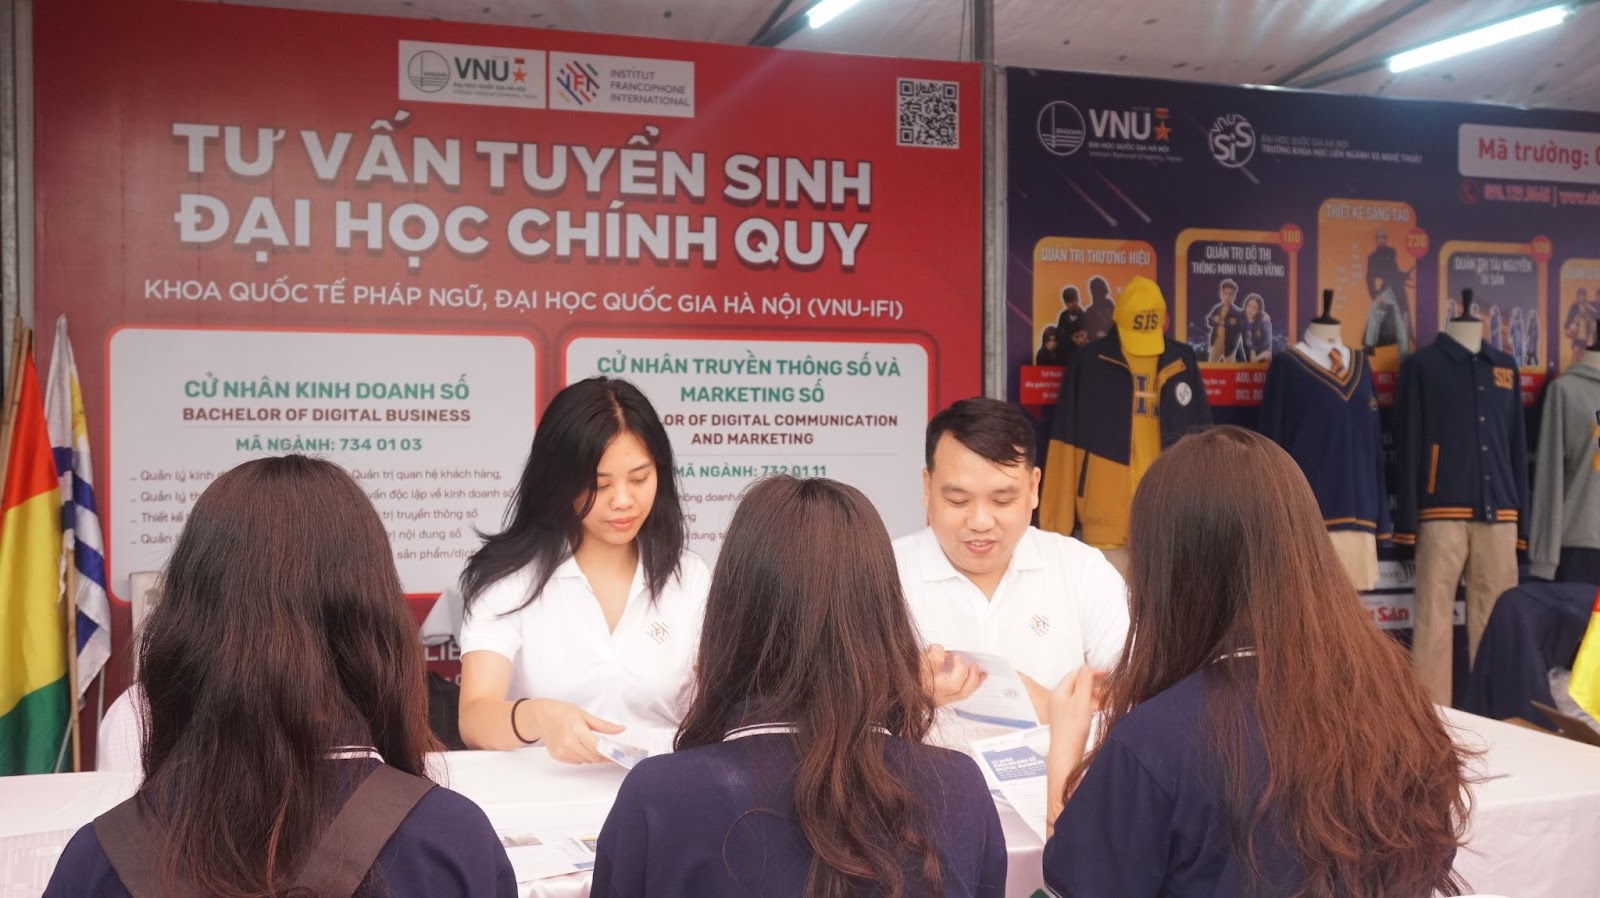 High school students receiving consultation at IFI's booth